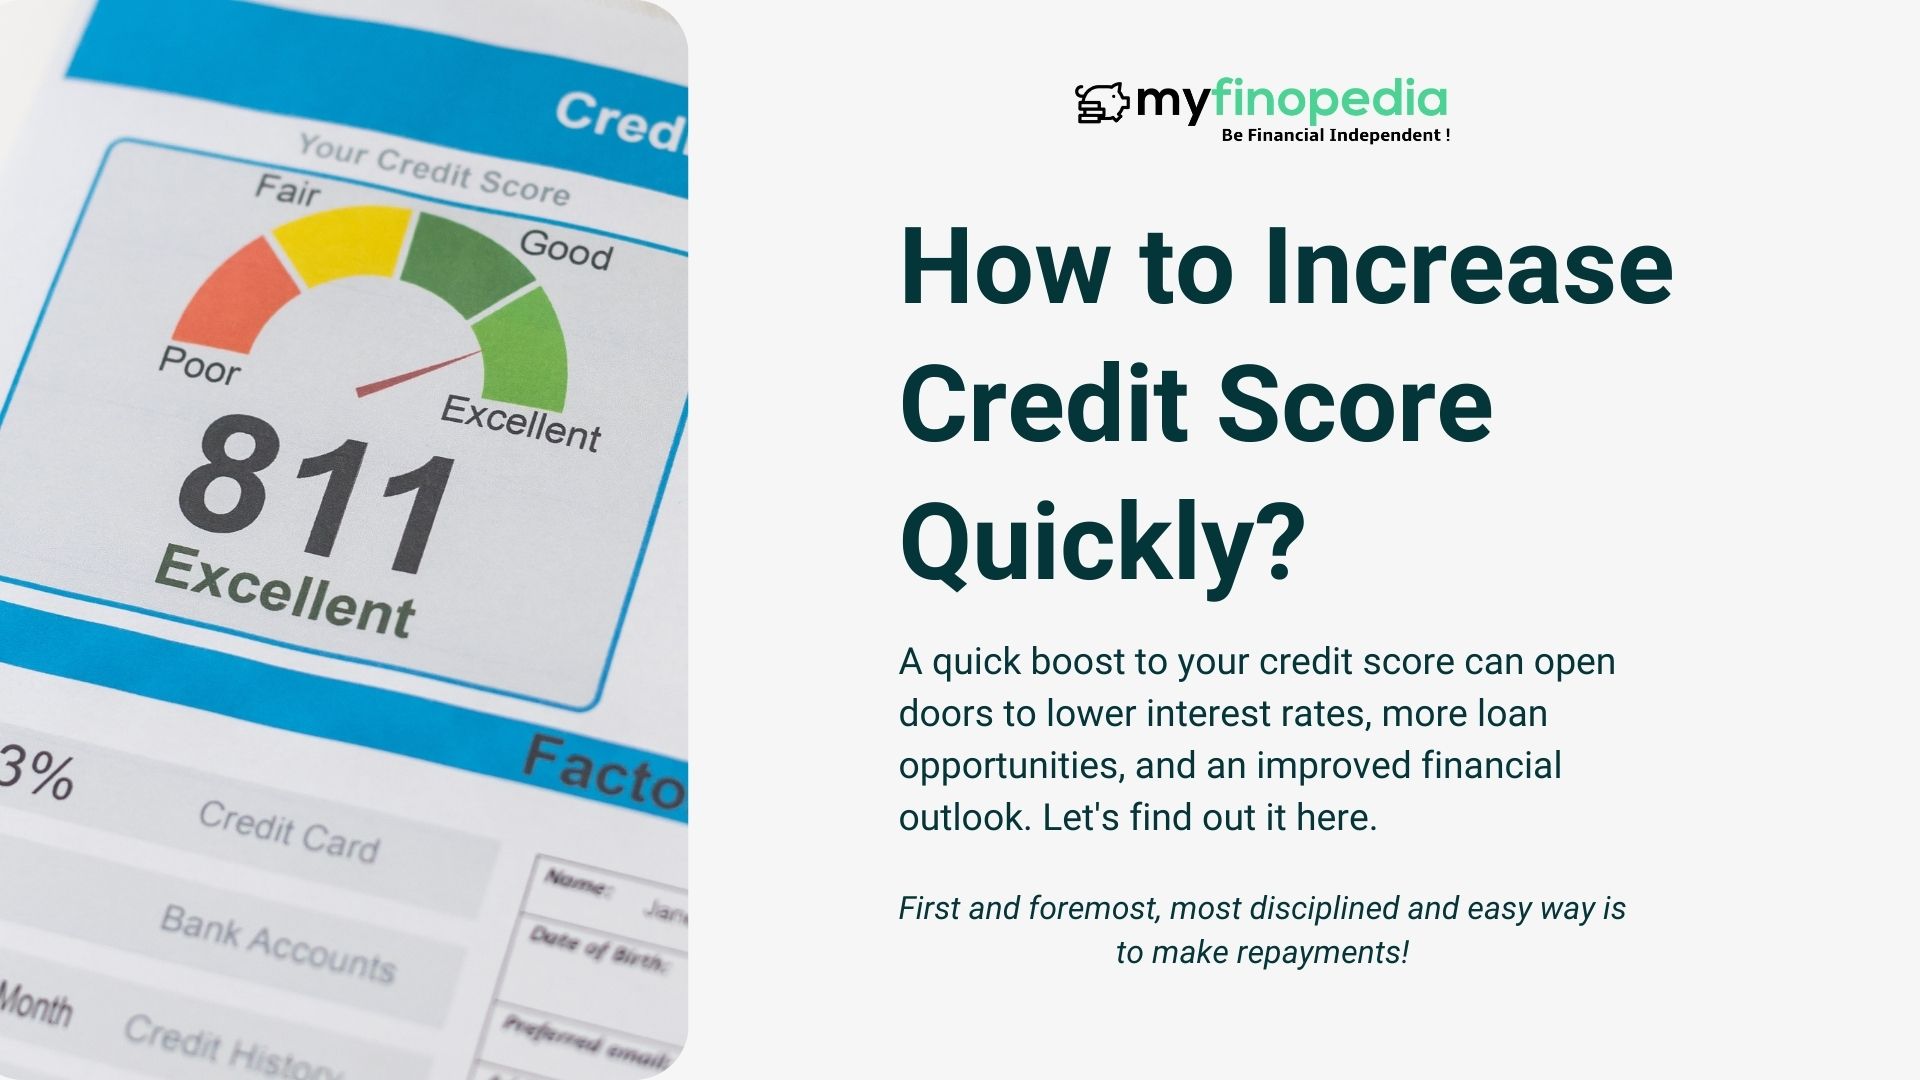 How to Increase Credit Score Quickly